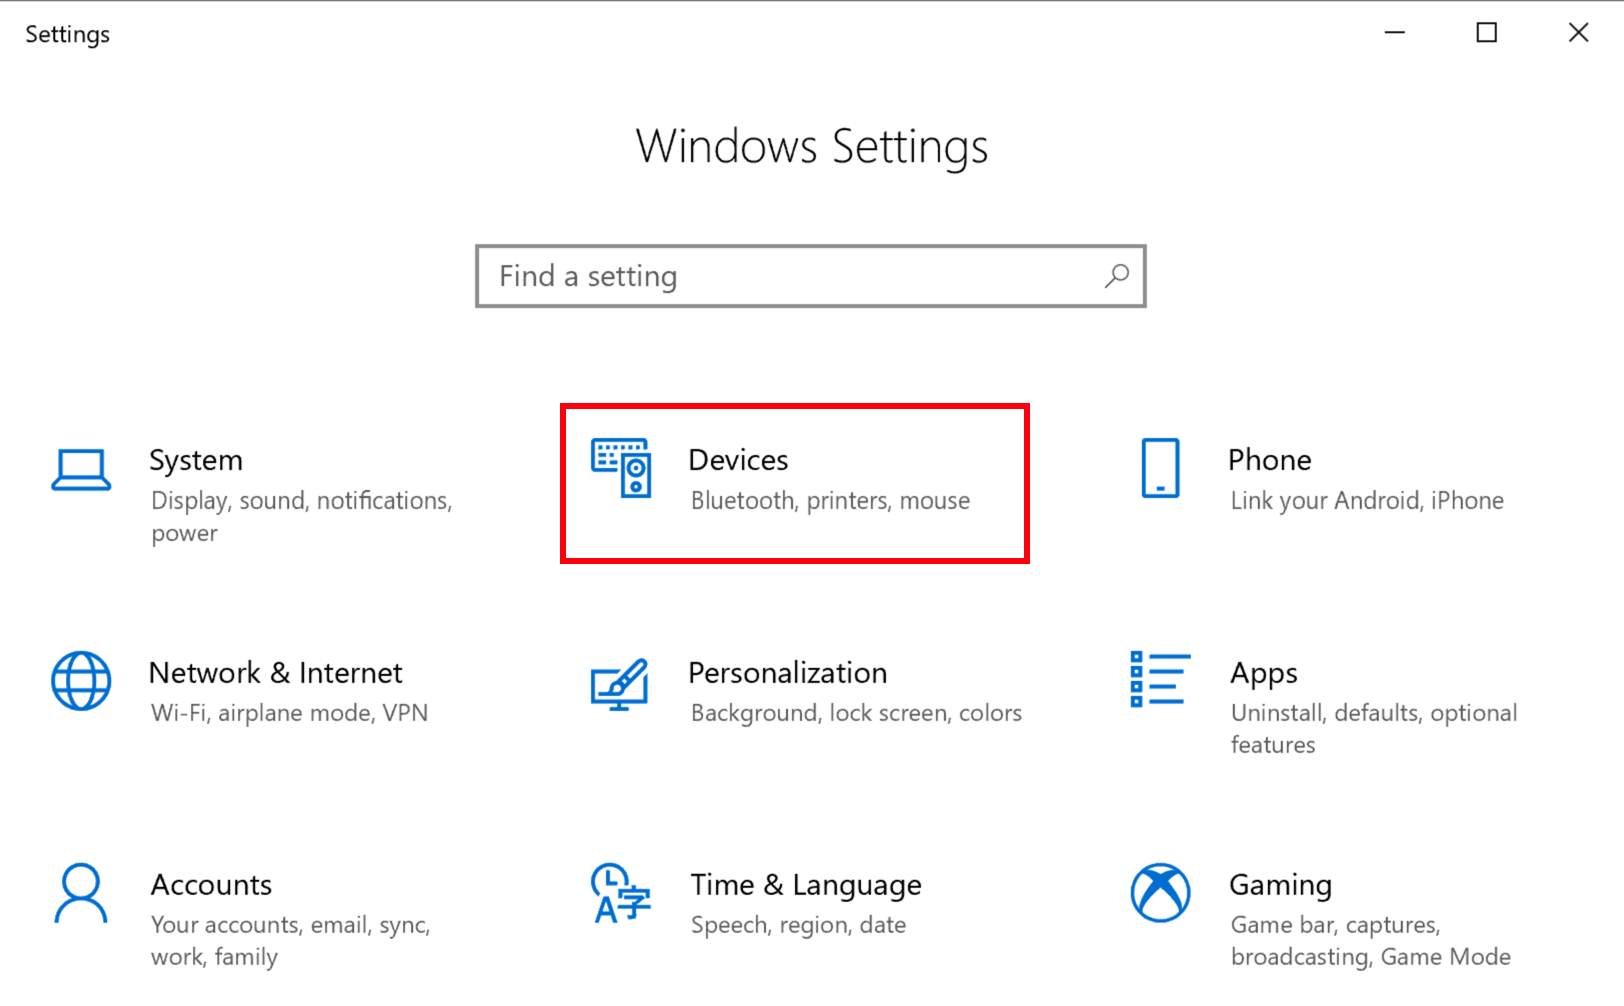 Windows Settings page open with Devices icon highlighted by red box.